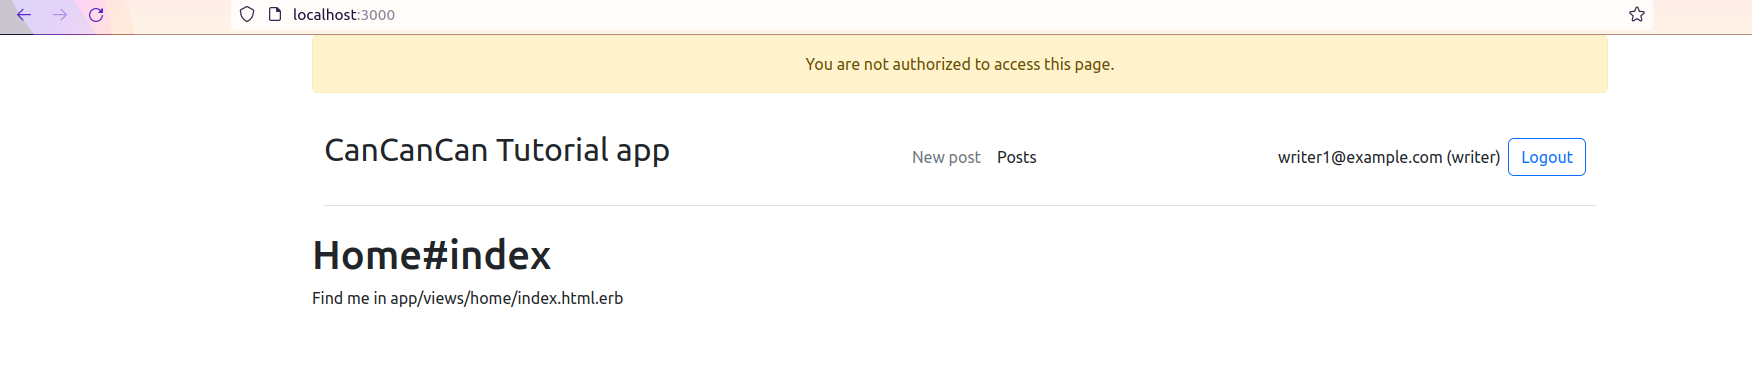 Handling CanCanCan's access denied exception